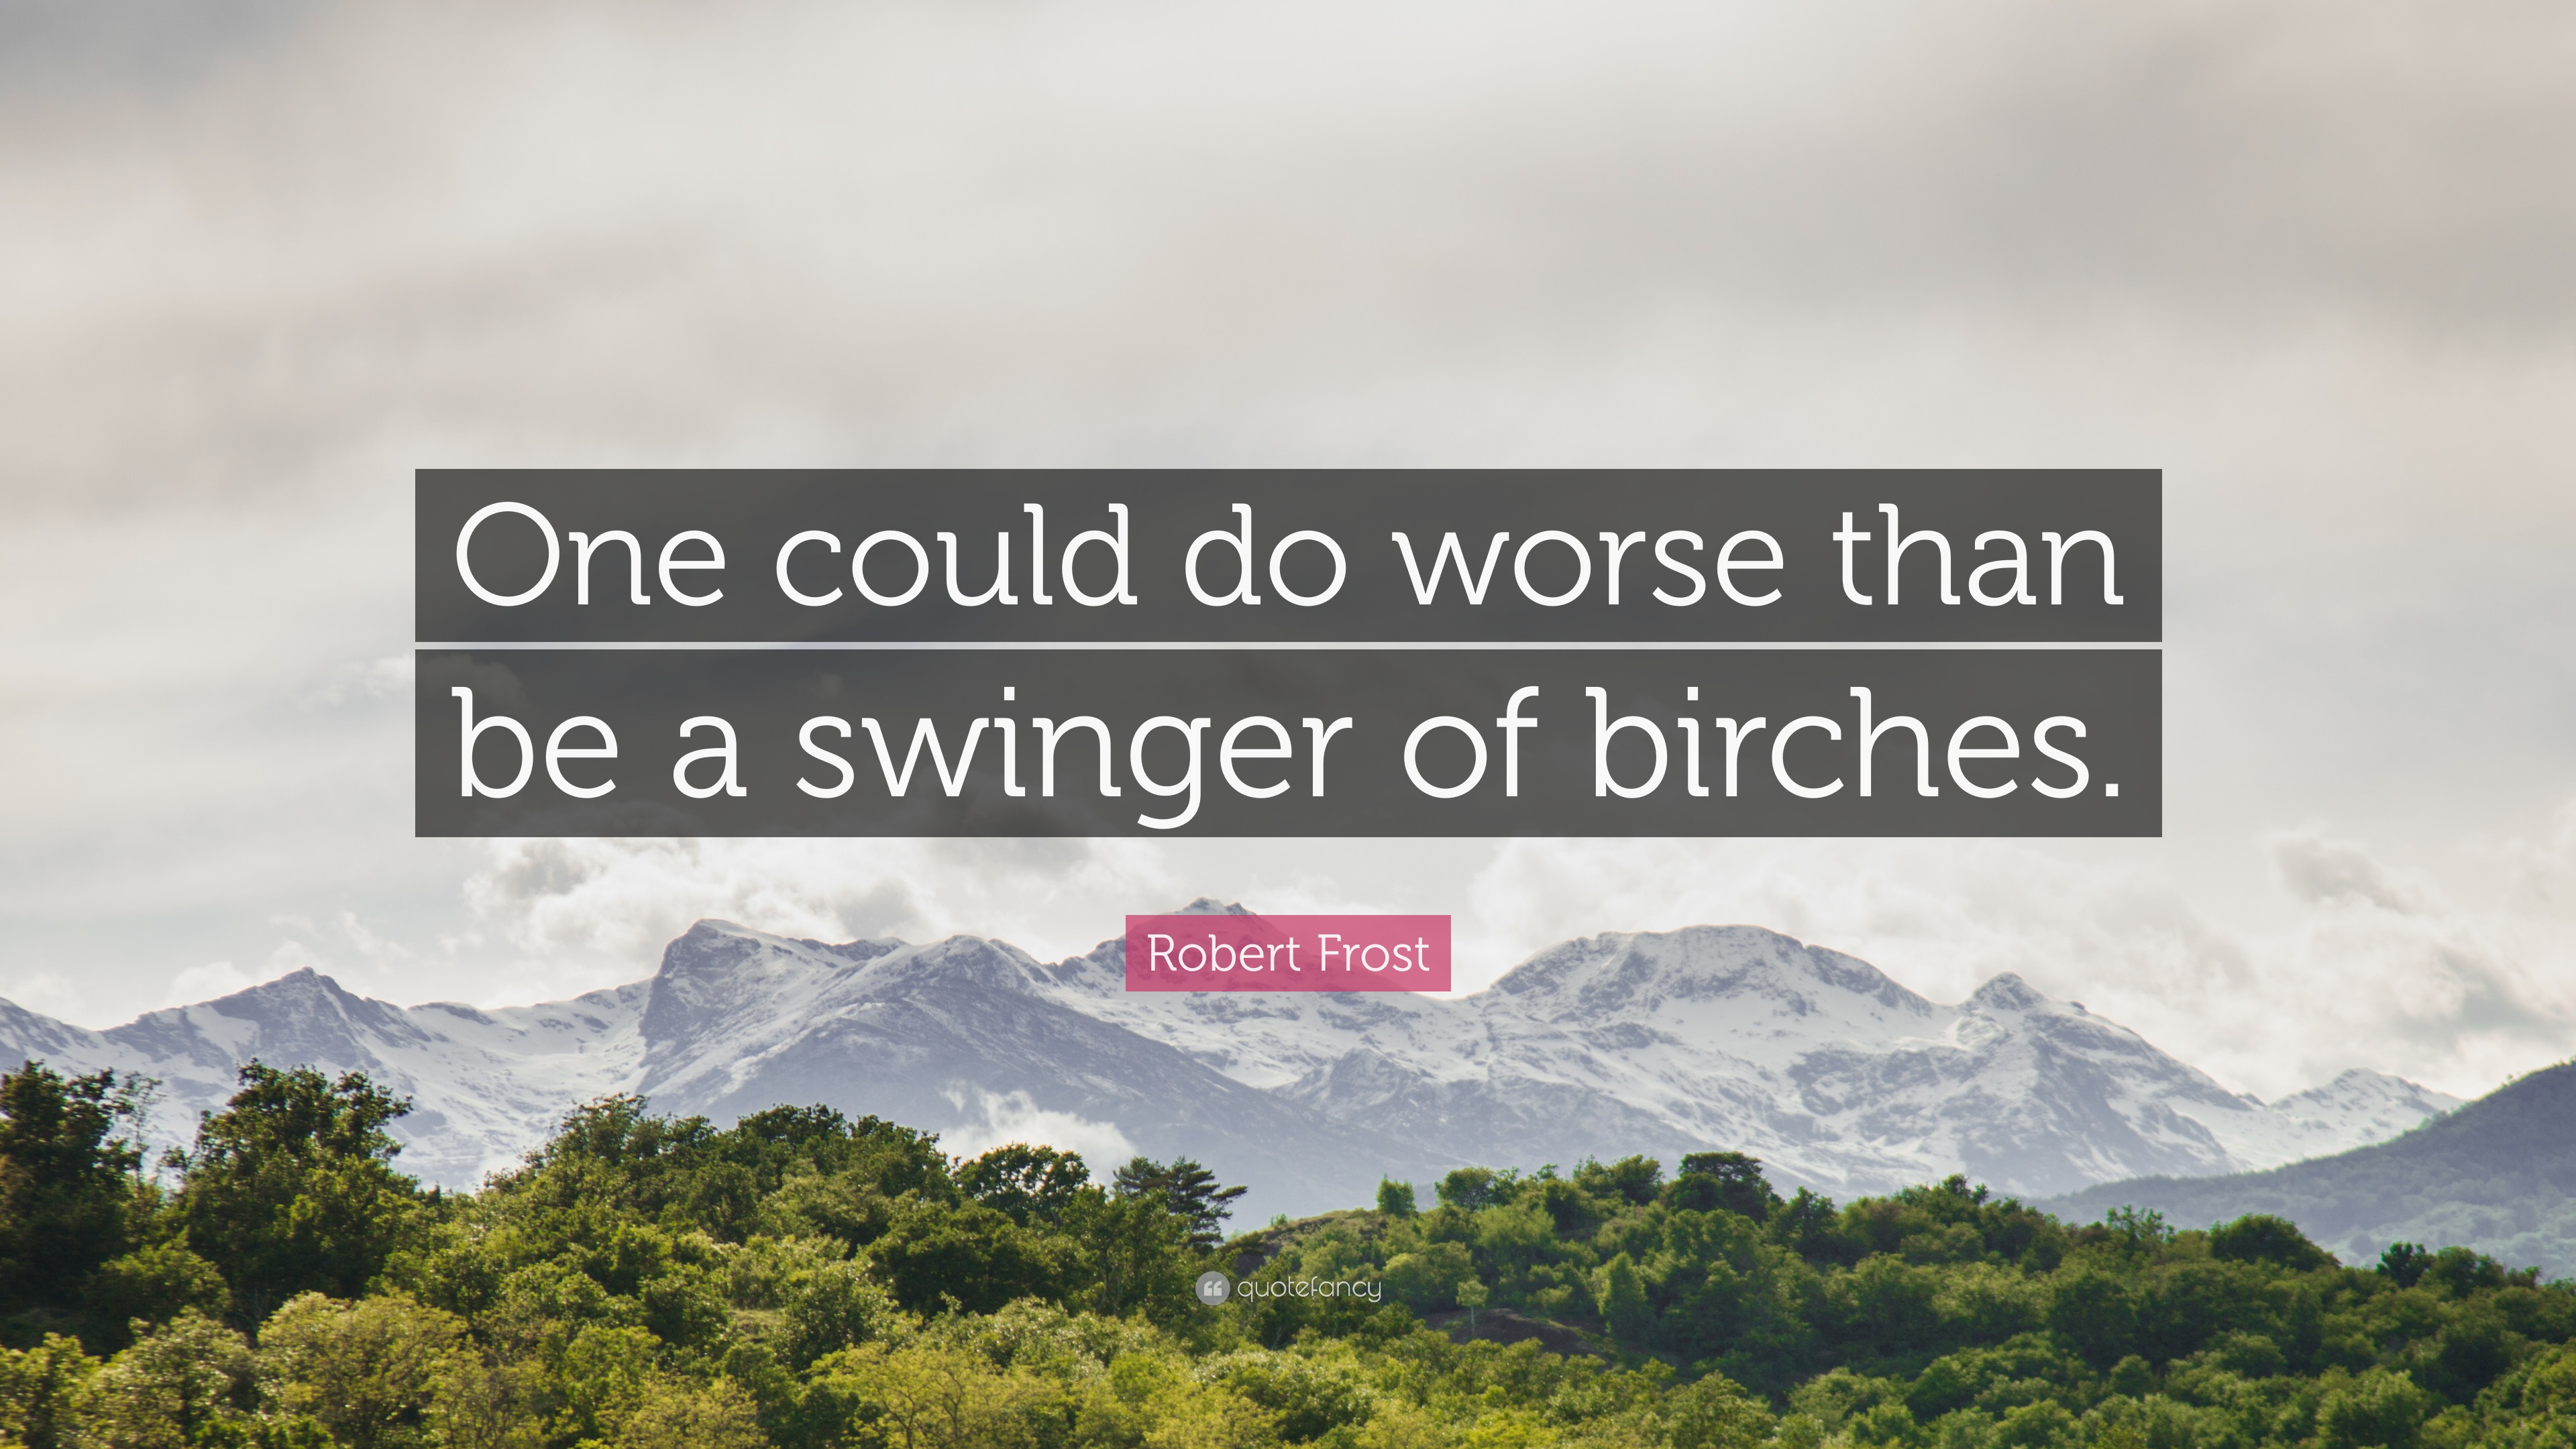 Robert Frost Quote “One could do worse than be a swinger of birches.” picture